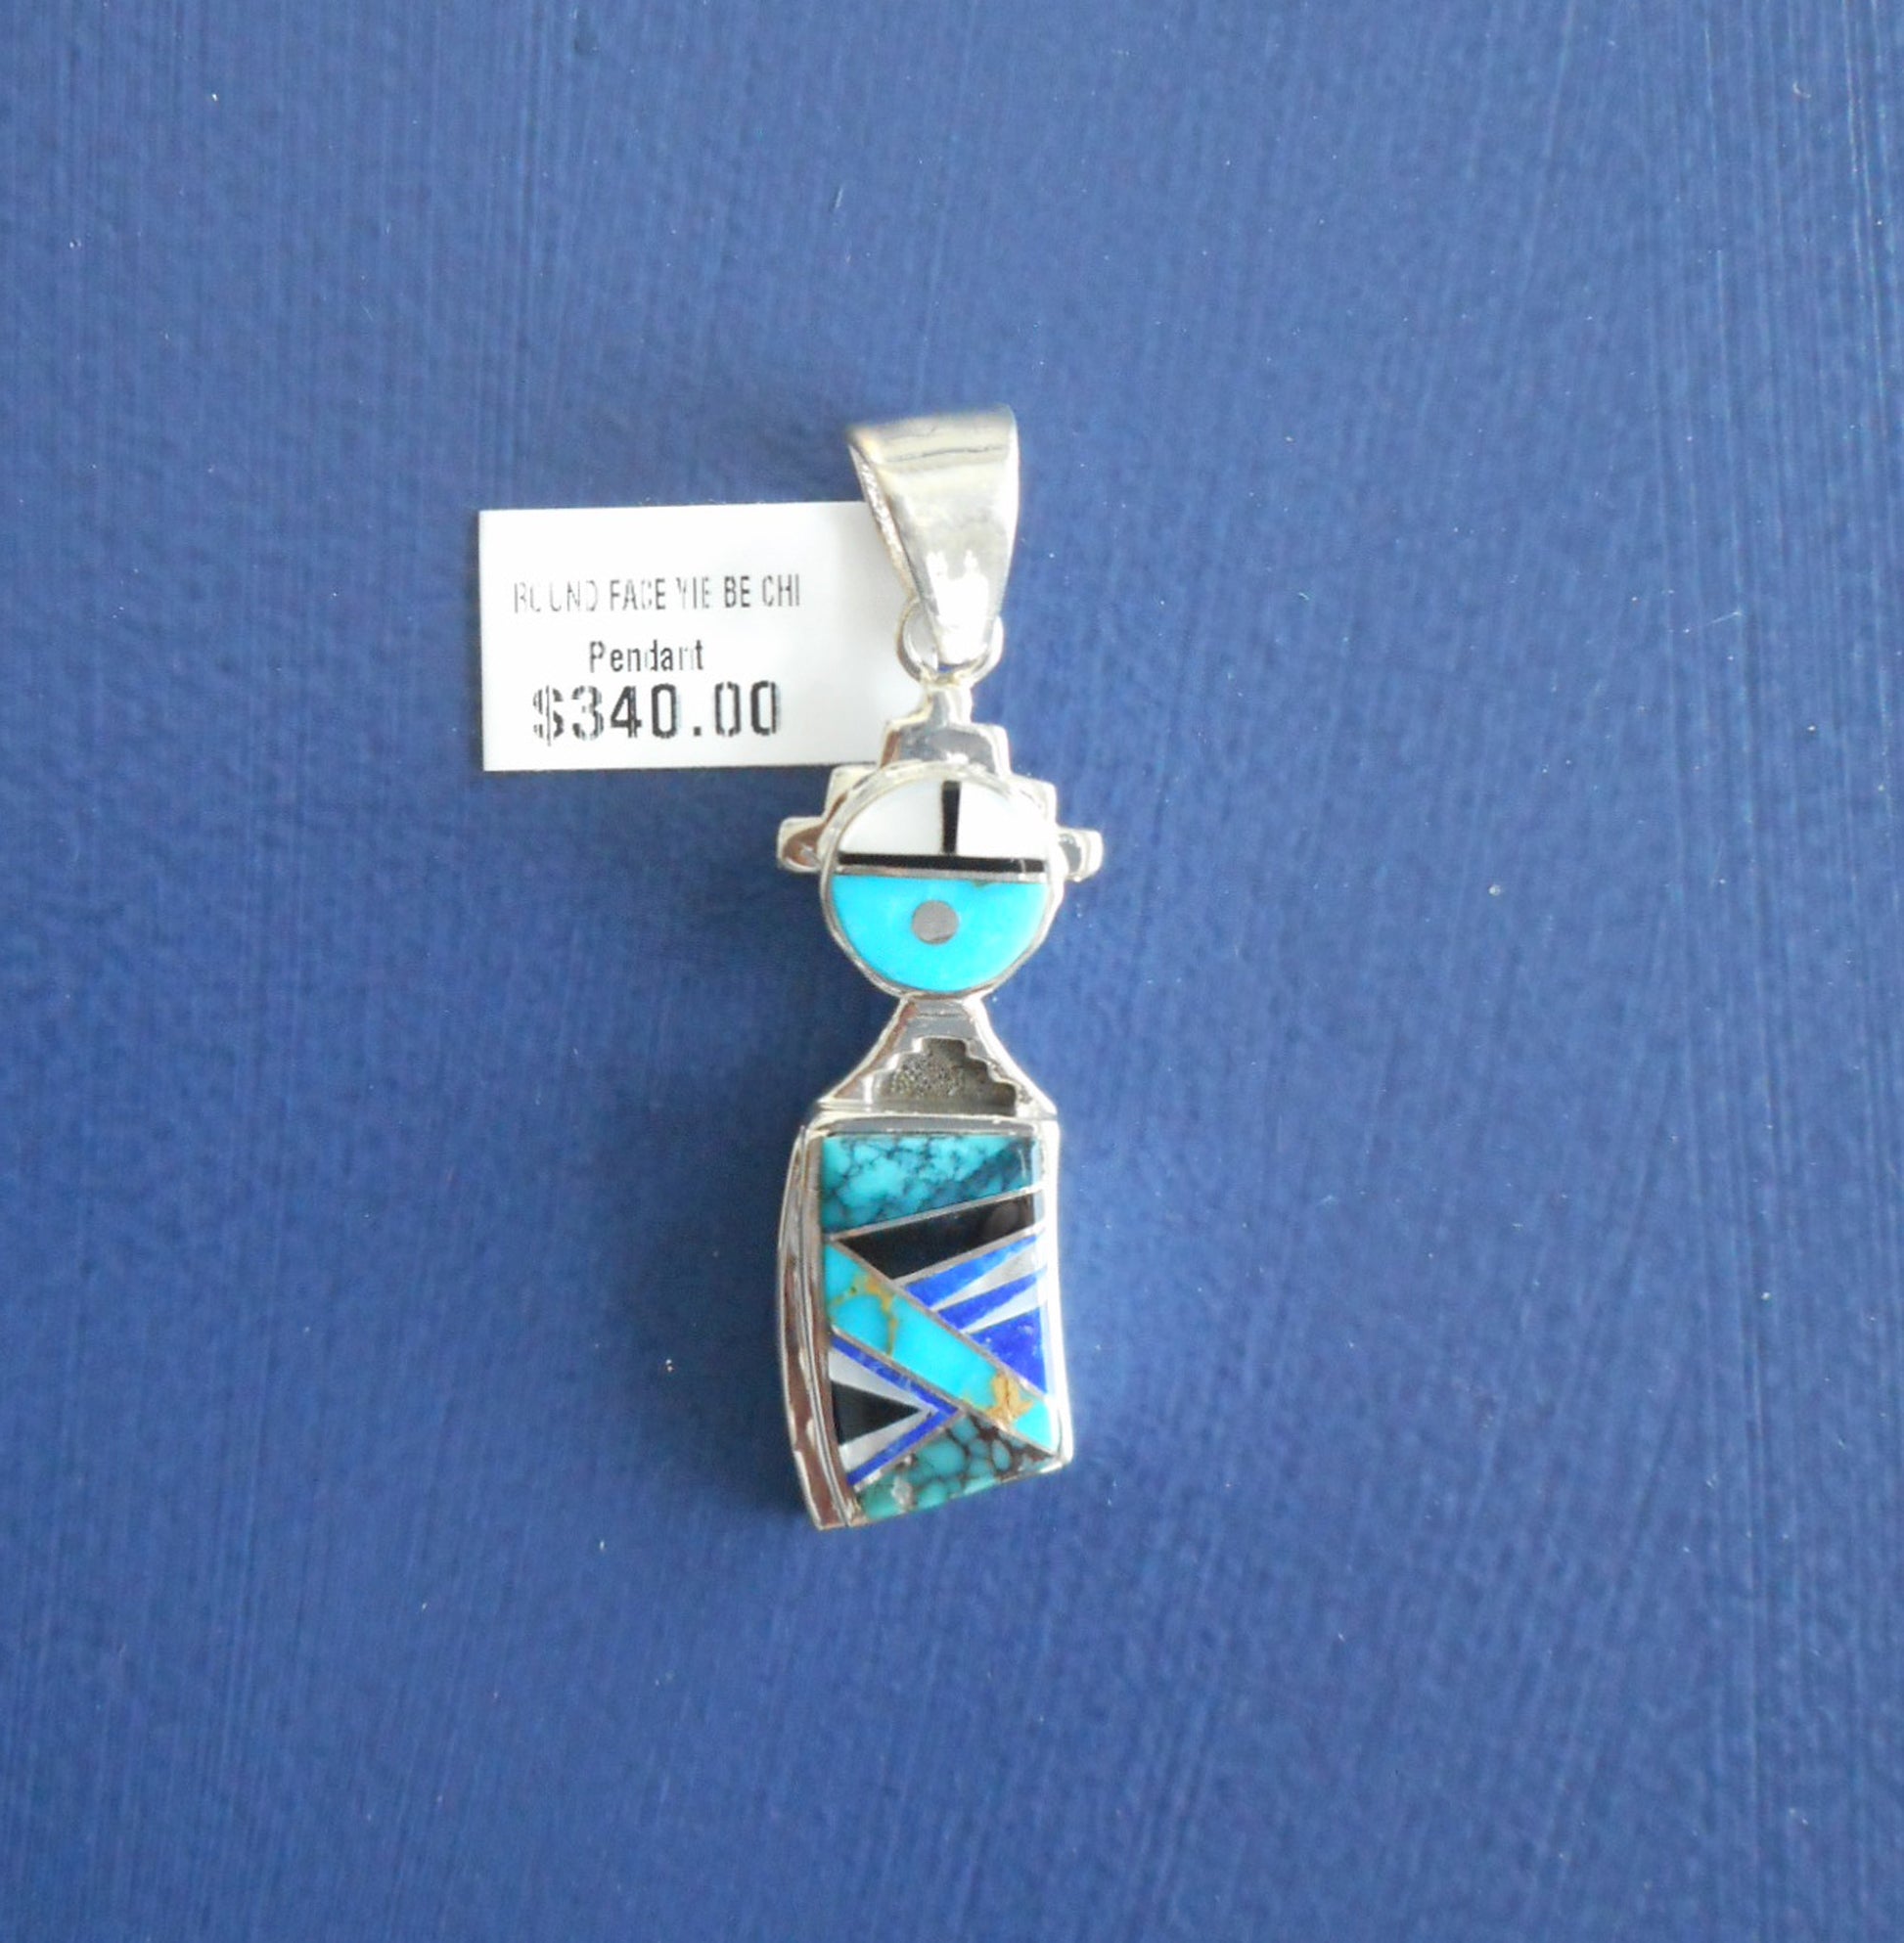 Round faced Yei pendant is made of inlaid stones of turquoise, only, lapis and Mother of Pearl.  Cut out silver around the head and on the neck. Silver bail.  2 inches long including the bail and .50 inches wide.